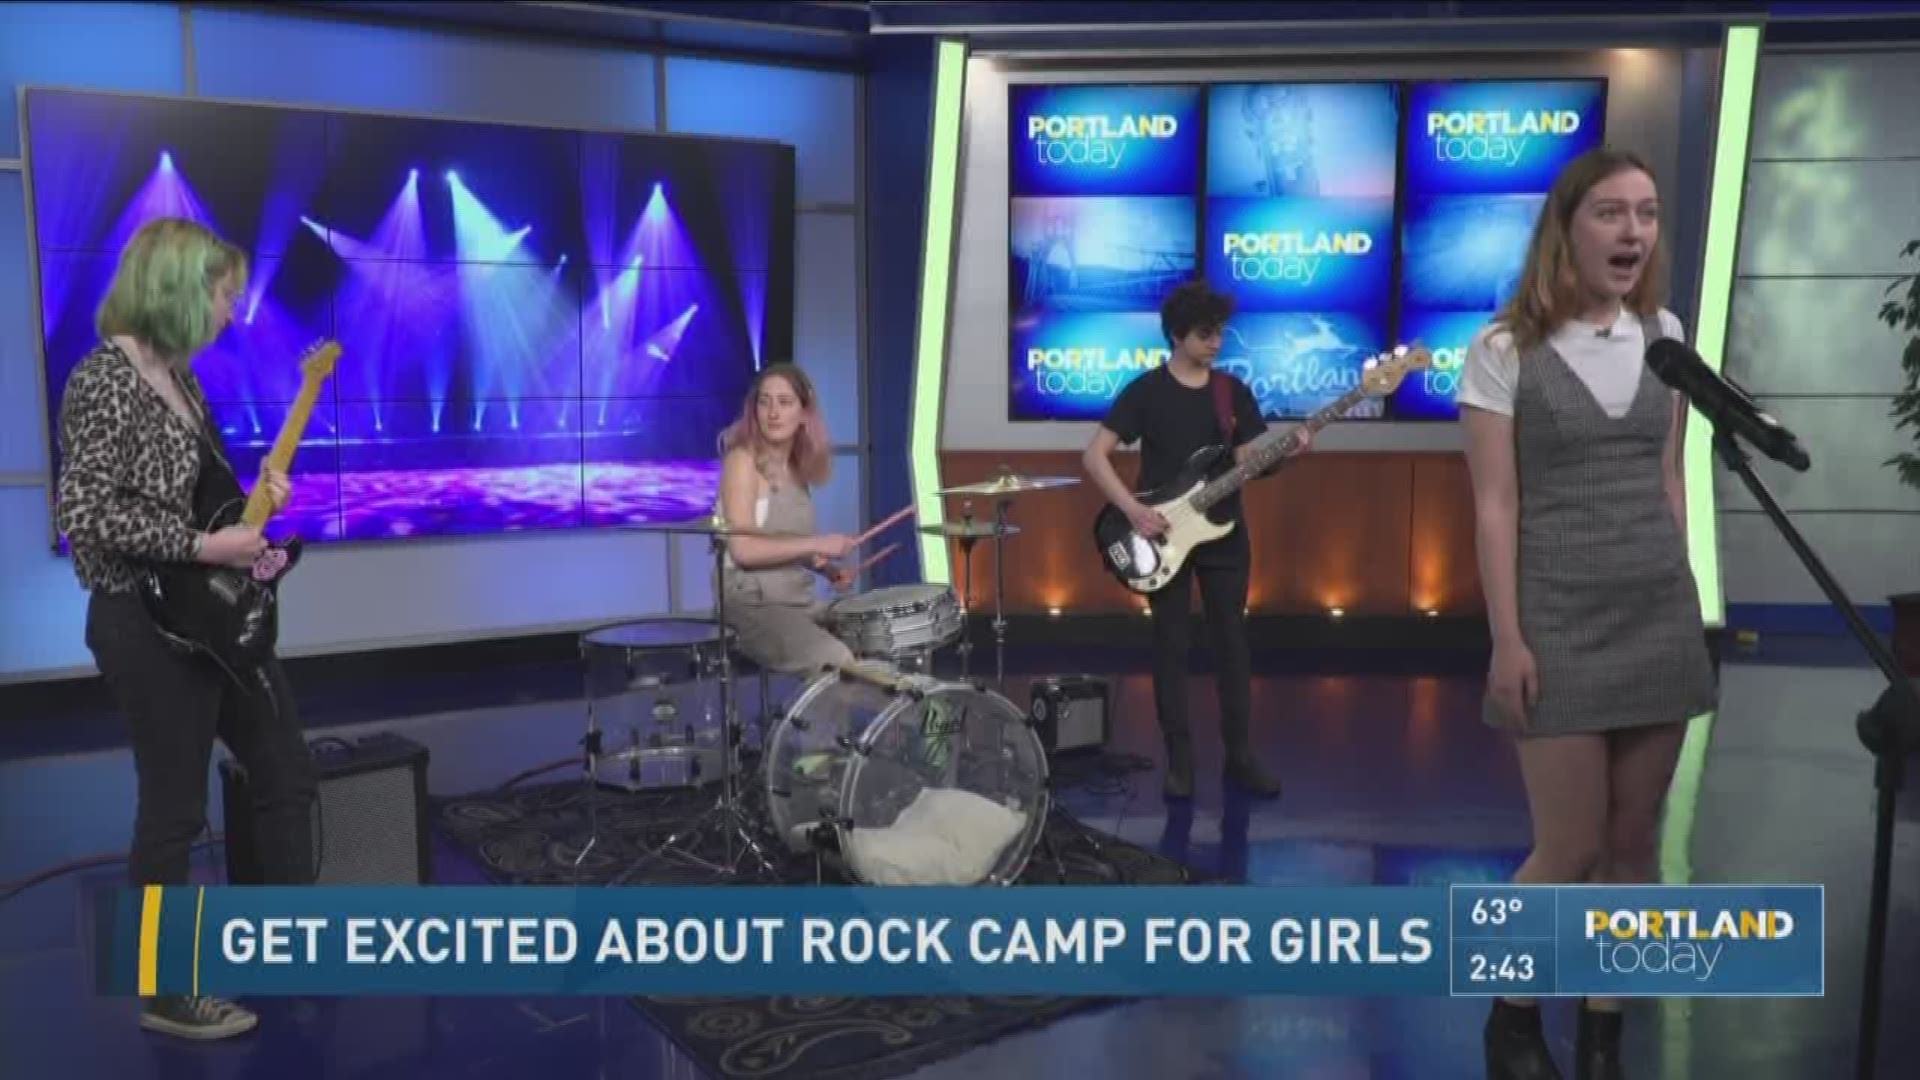 Get excited about rock camp for girls